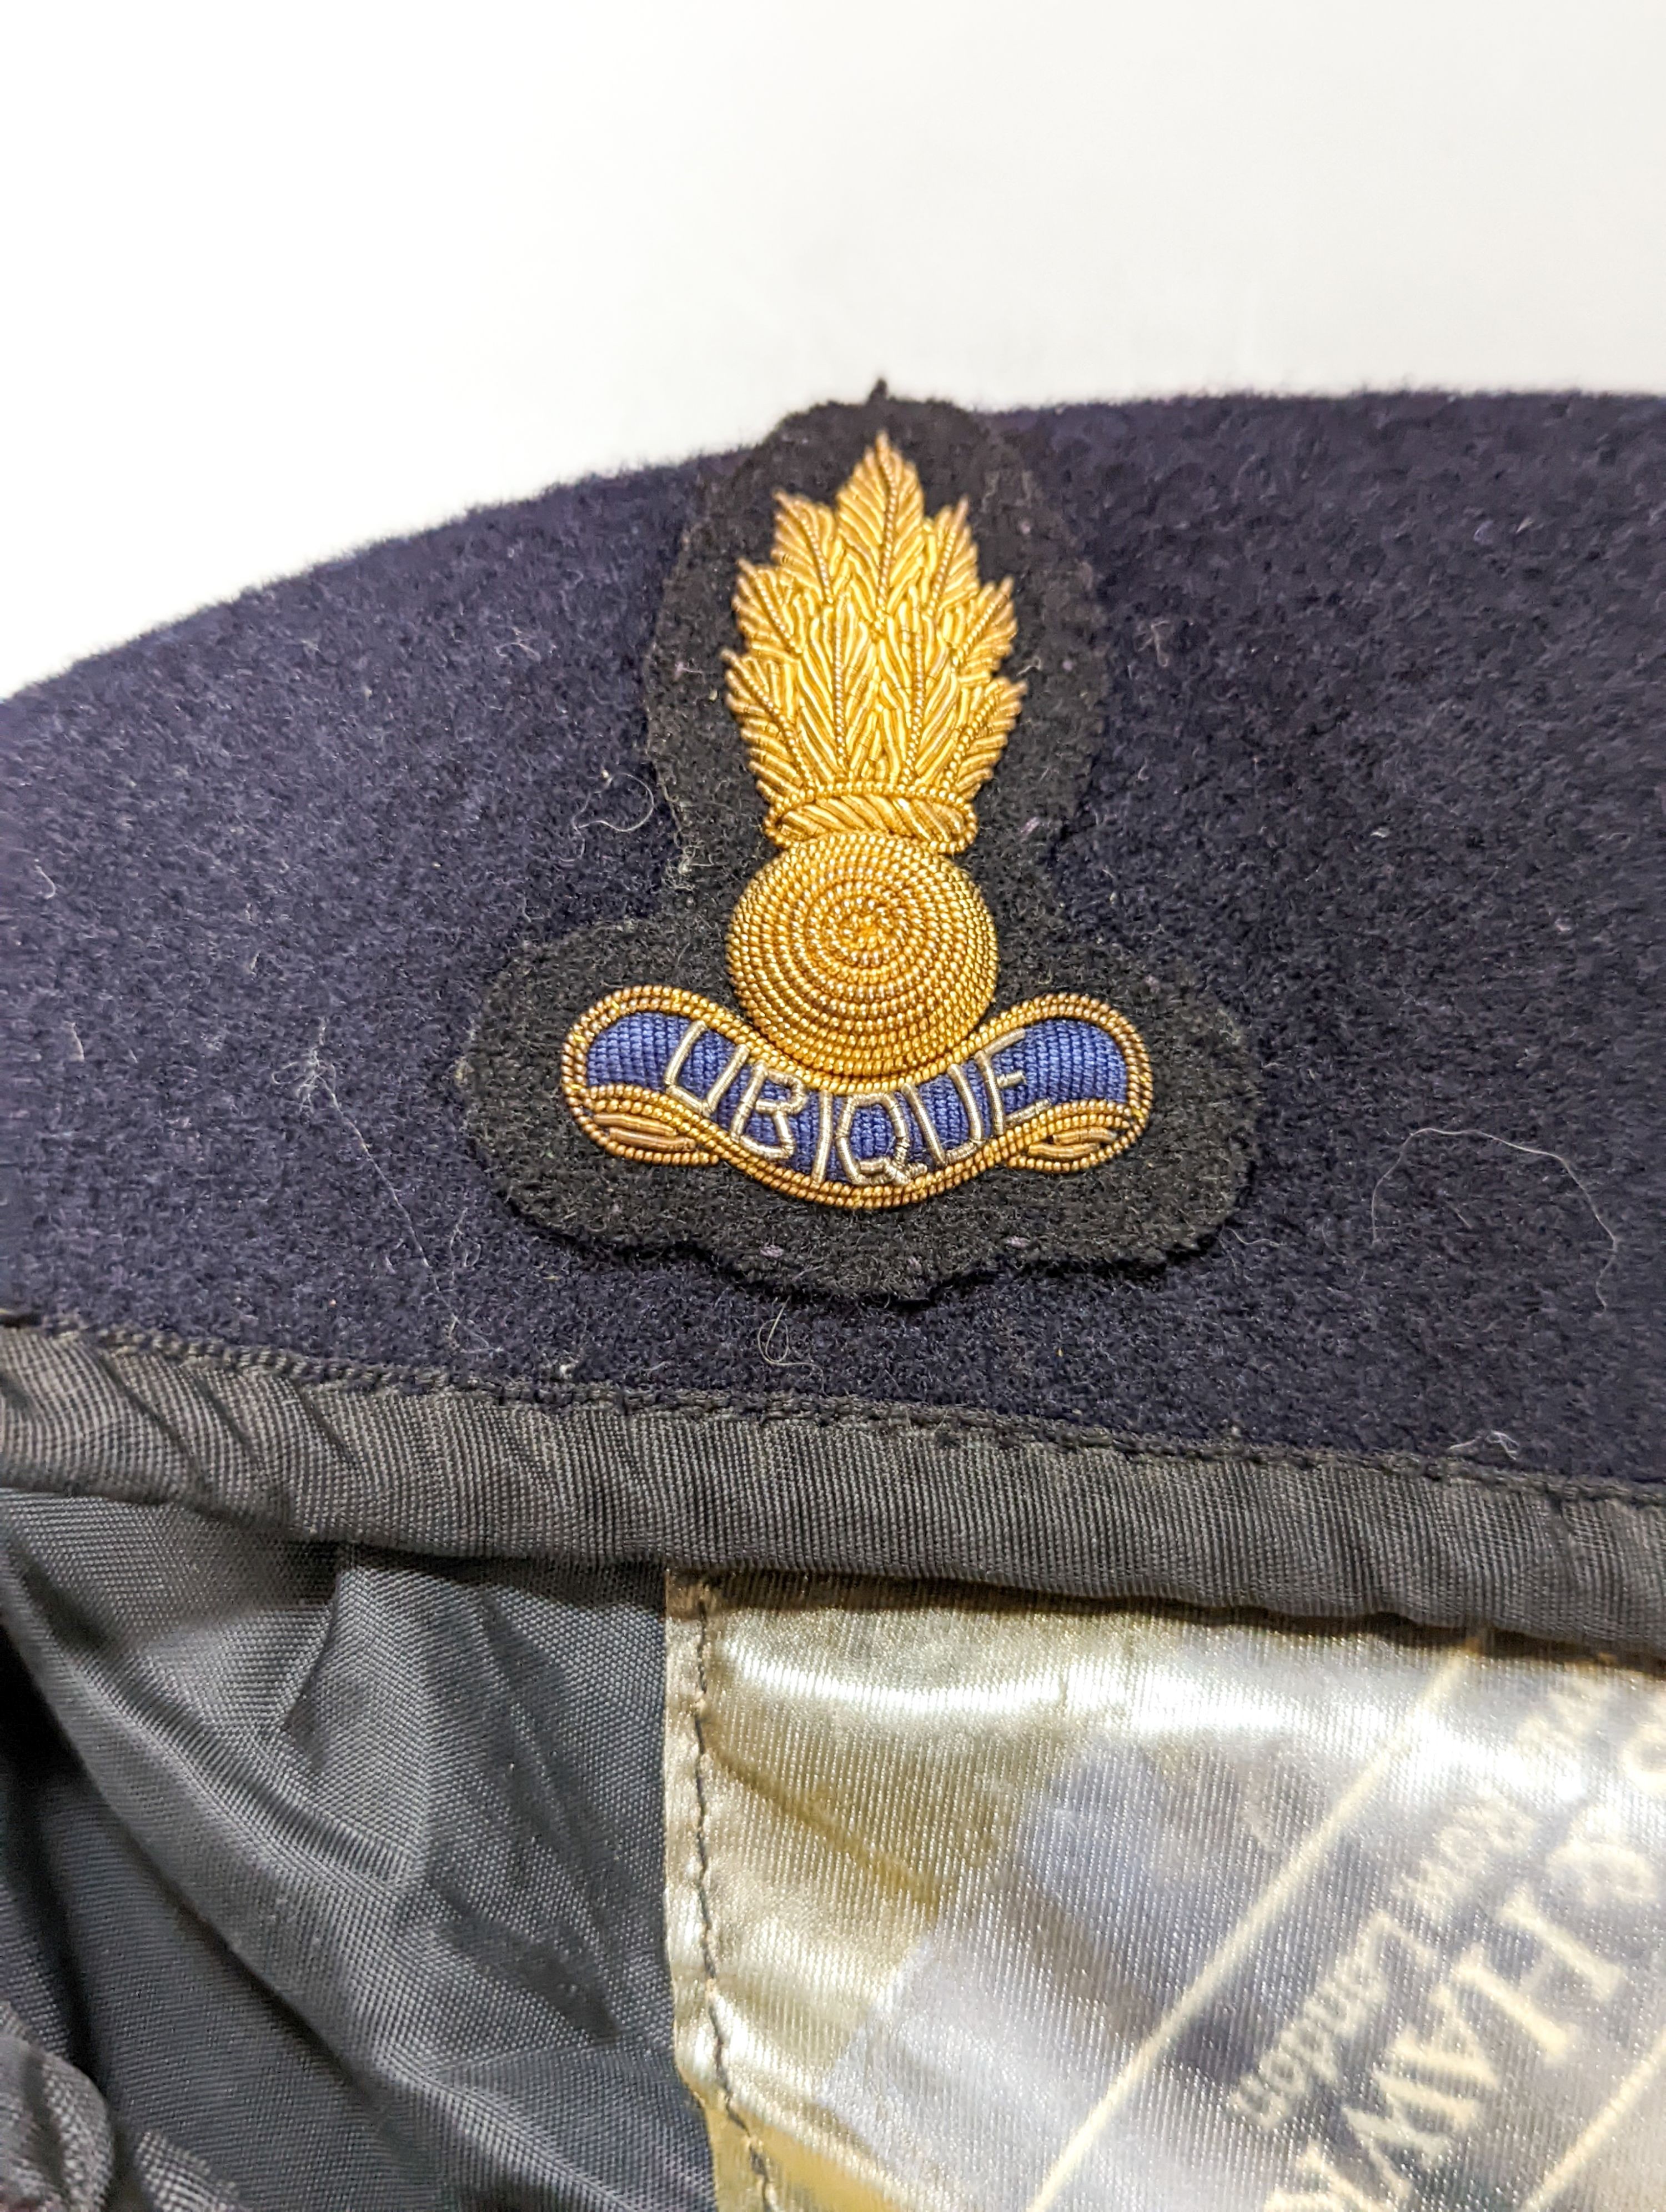 Three rare incendiary cartridge cut always, a beret with rare Royal Engineers officer's bullion wire '9-flame' cap badge, ARP bell dated '39 and various Boys Brigade cap badges